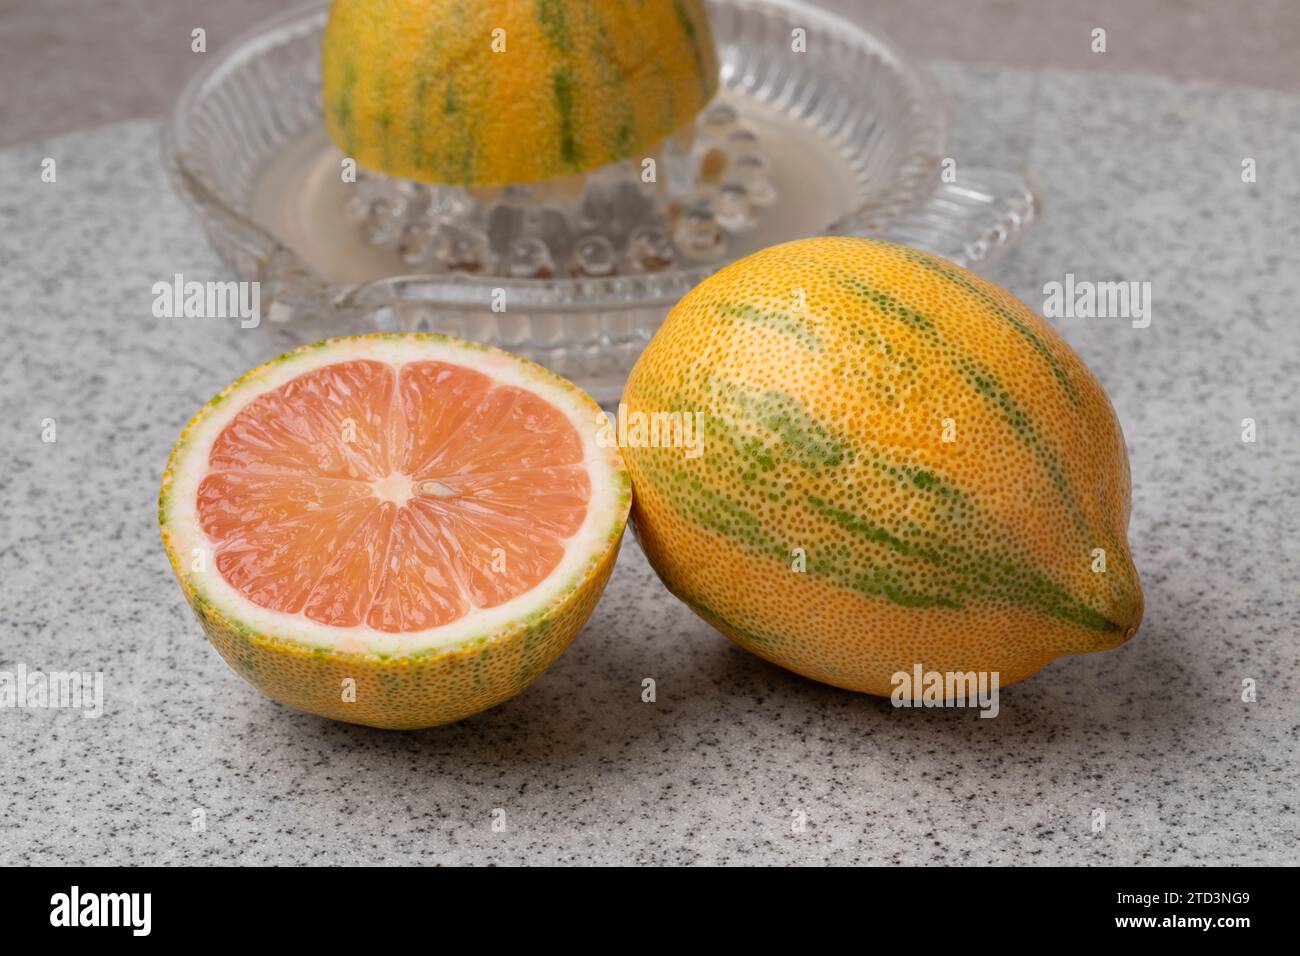 Whole and halved tiger lemon and glass juicer close up Stock Photo